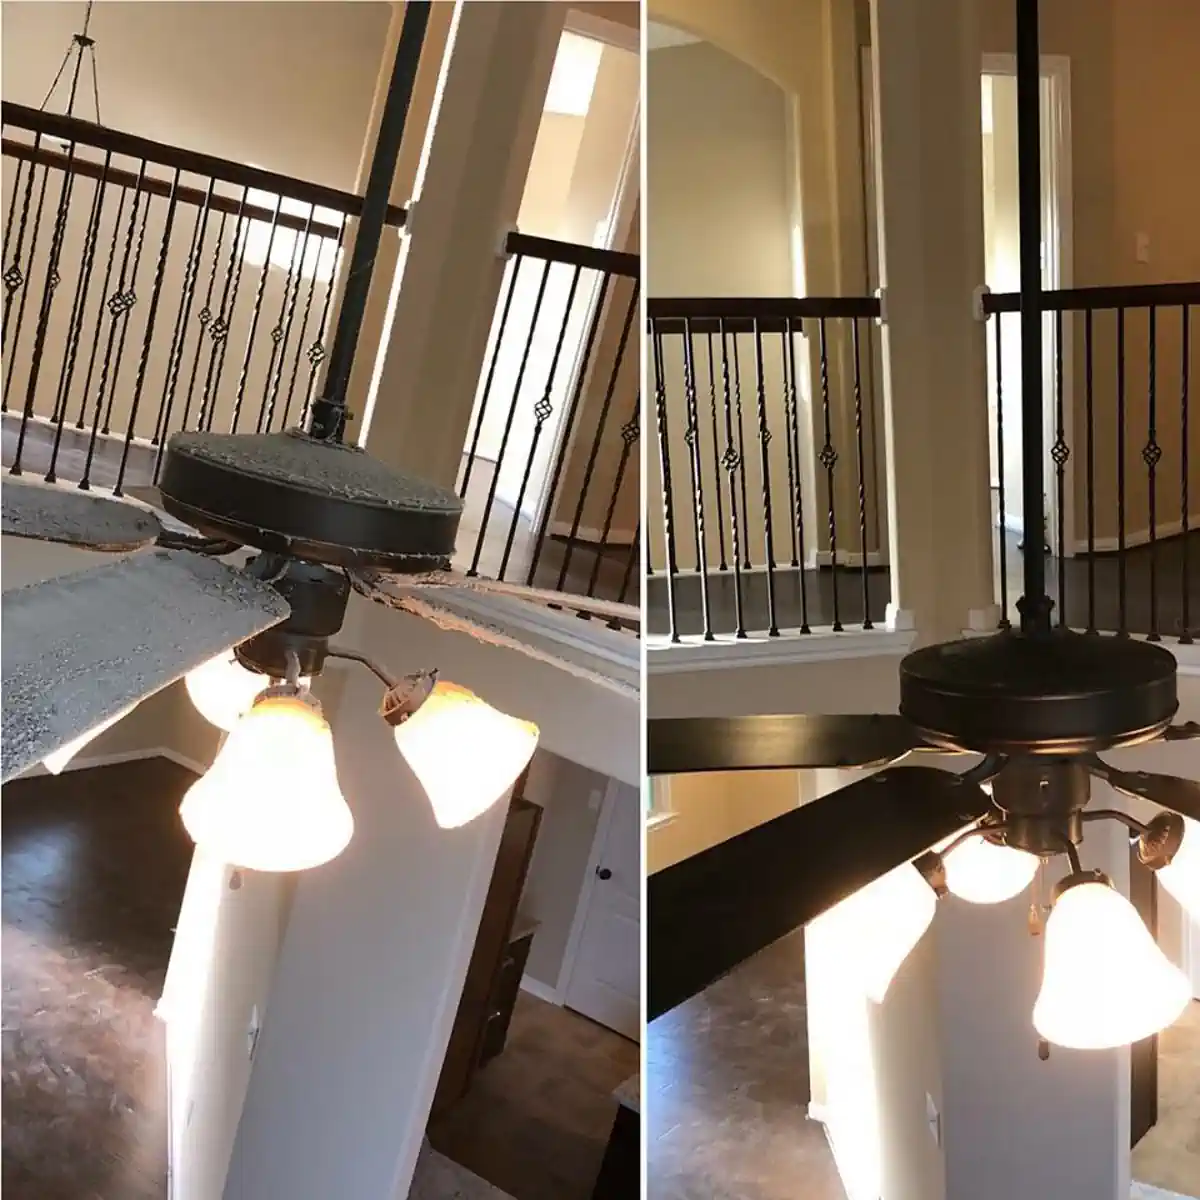 Clean ceiling fan - before and after